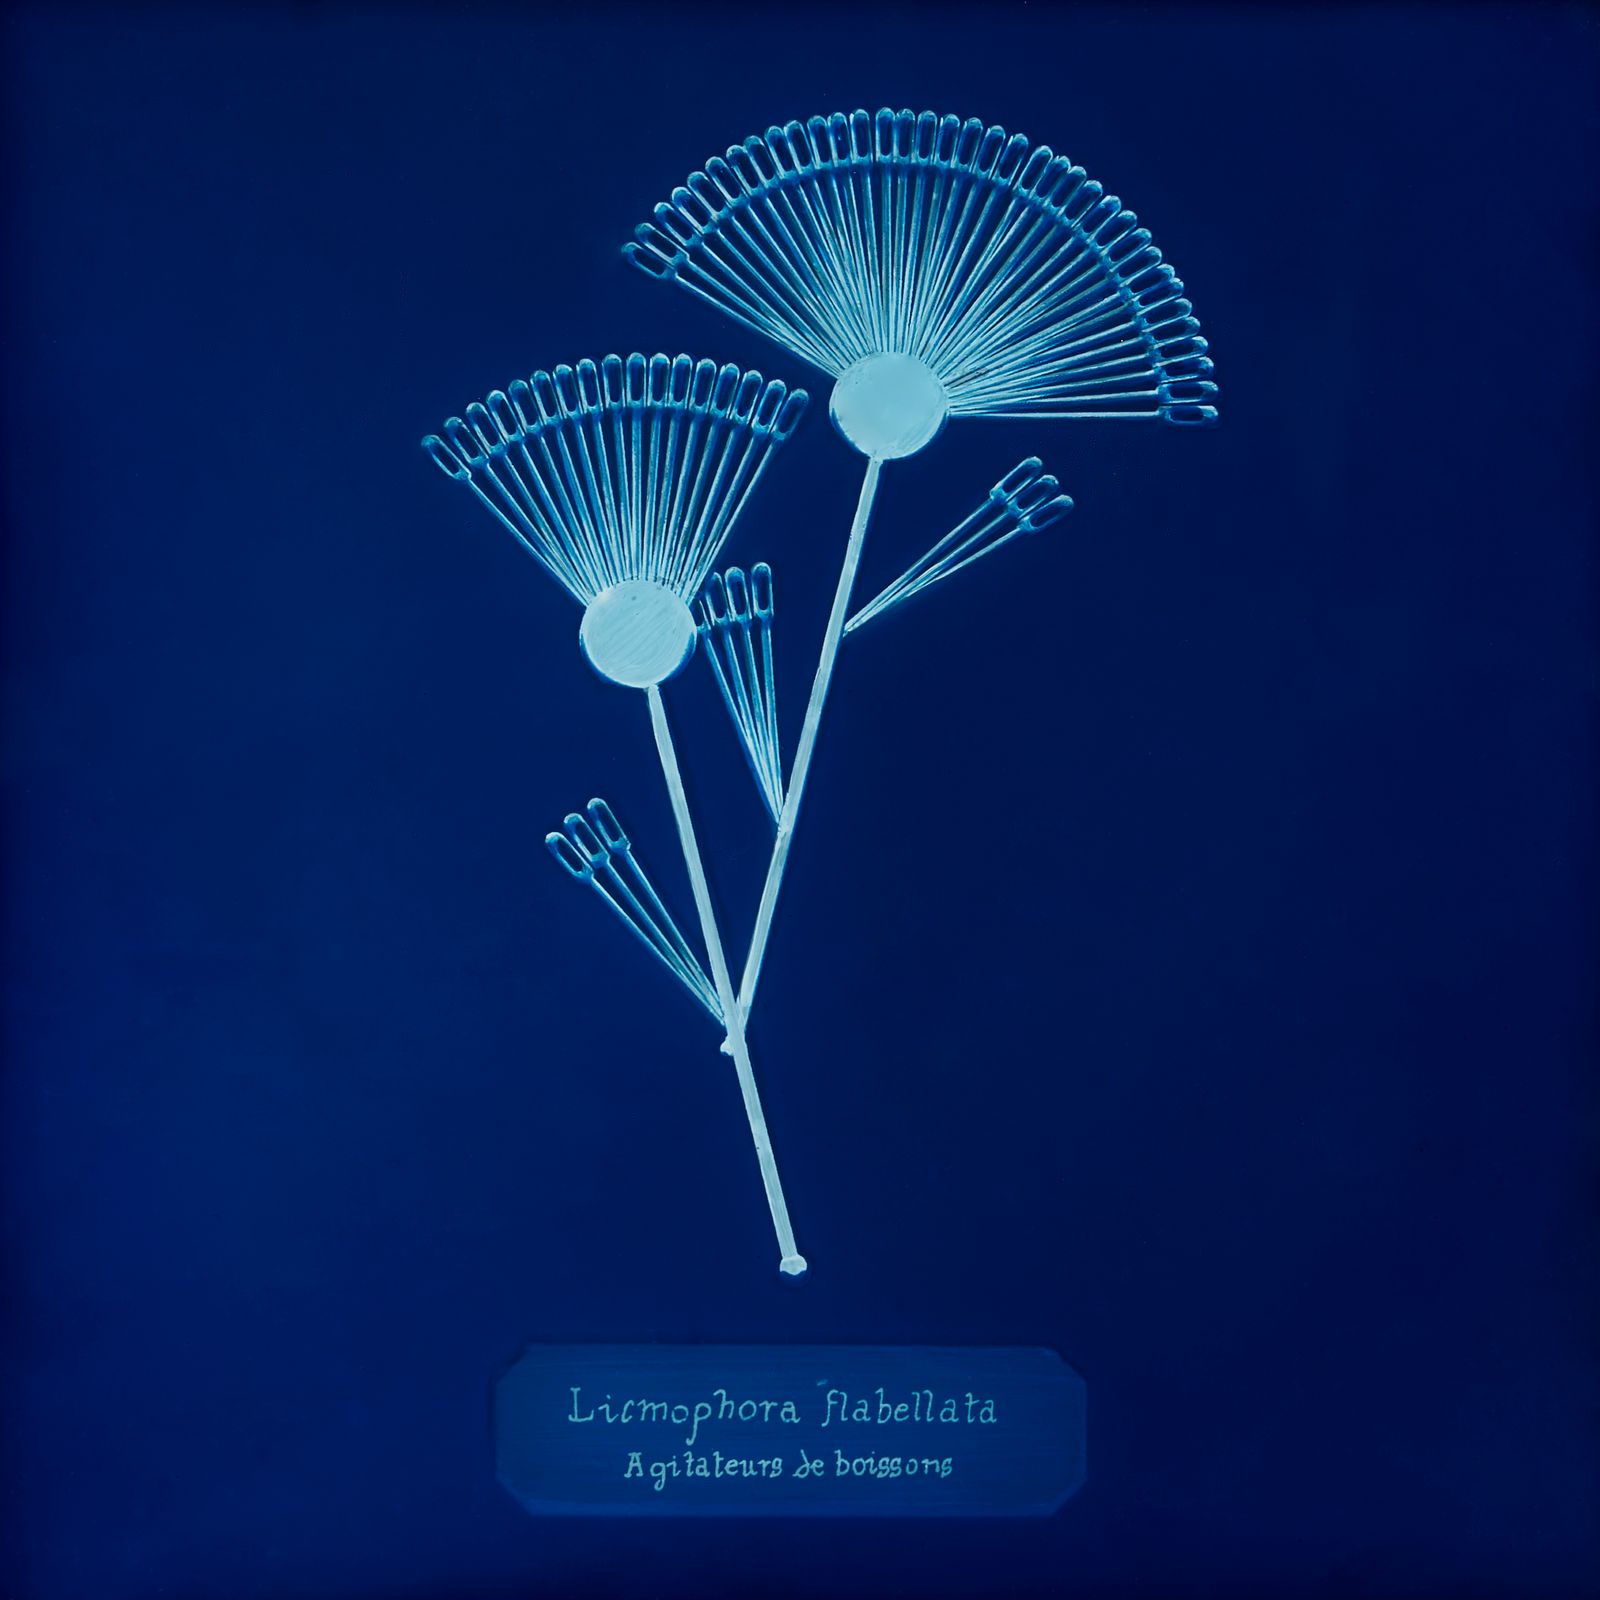 © Manon Lanjouère - Licmophora flabellata, Coffee and cocktail stirrers, Cyanotype on glass and fluorescent vynil emulsion, 20x20 cm